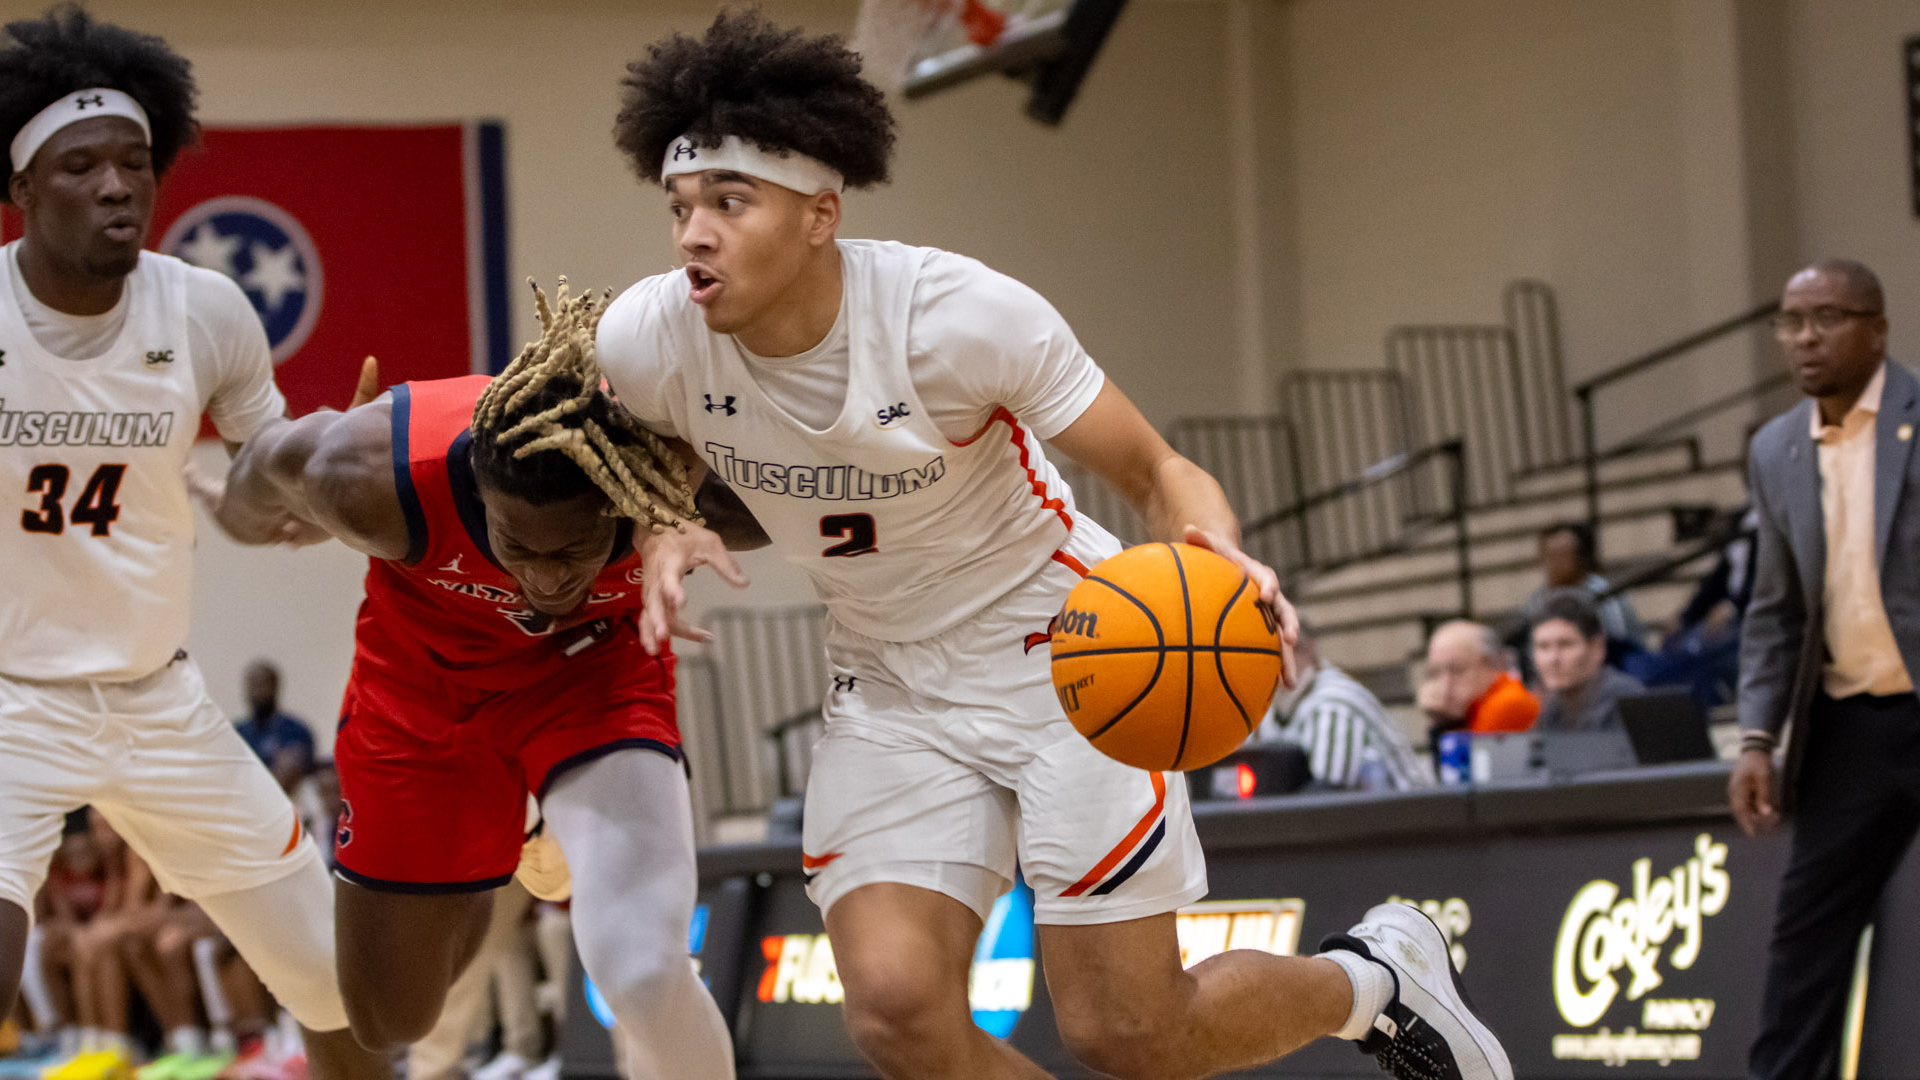 Bryce Jackson scored 16 points as Tusculum recorded its third straight victory with a 78-66 win over Catawba (photo by Kari Ham).